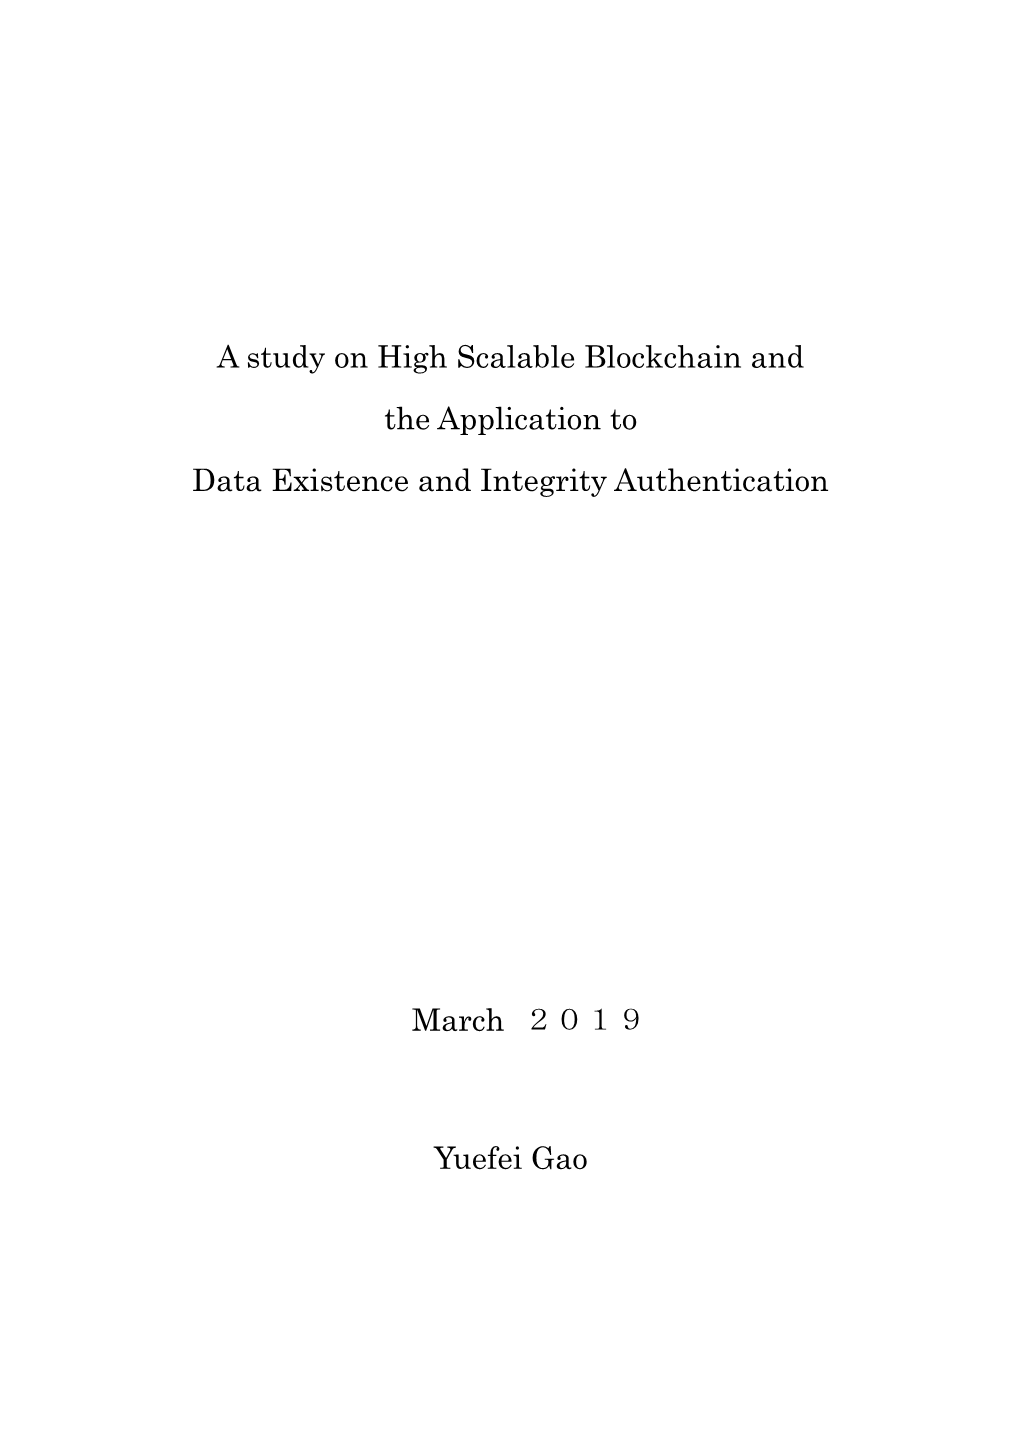 A Study on High Scalable Blockchain and the Application to Data Existence and Integrity Authentication